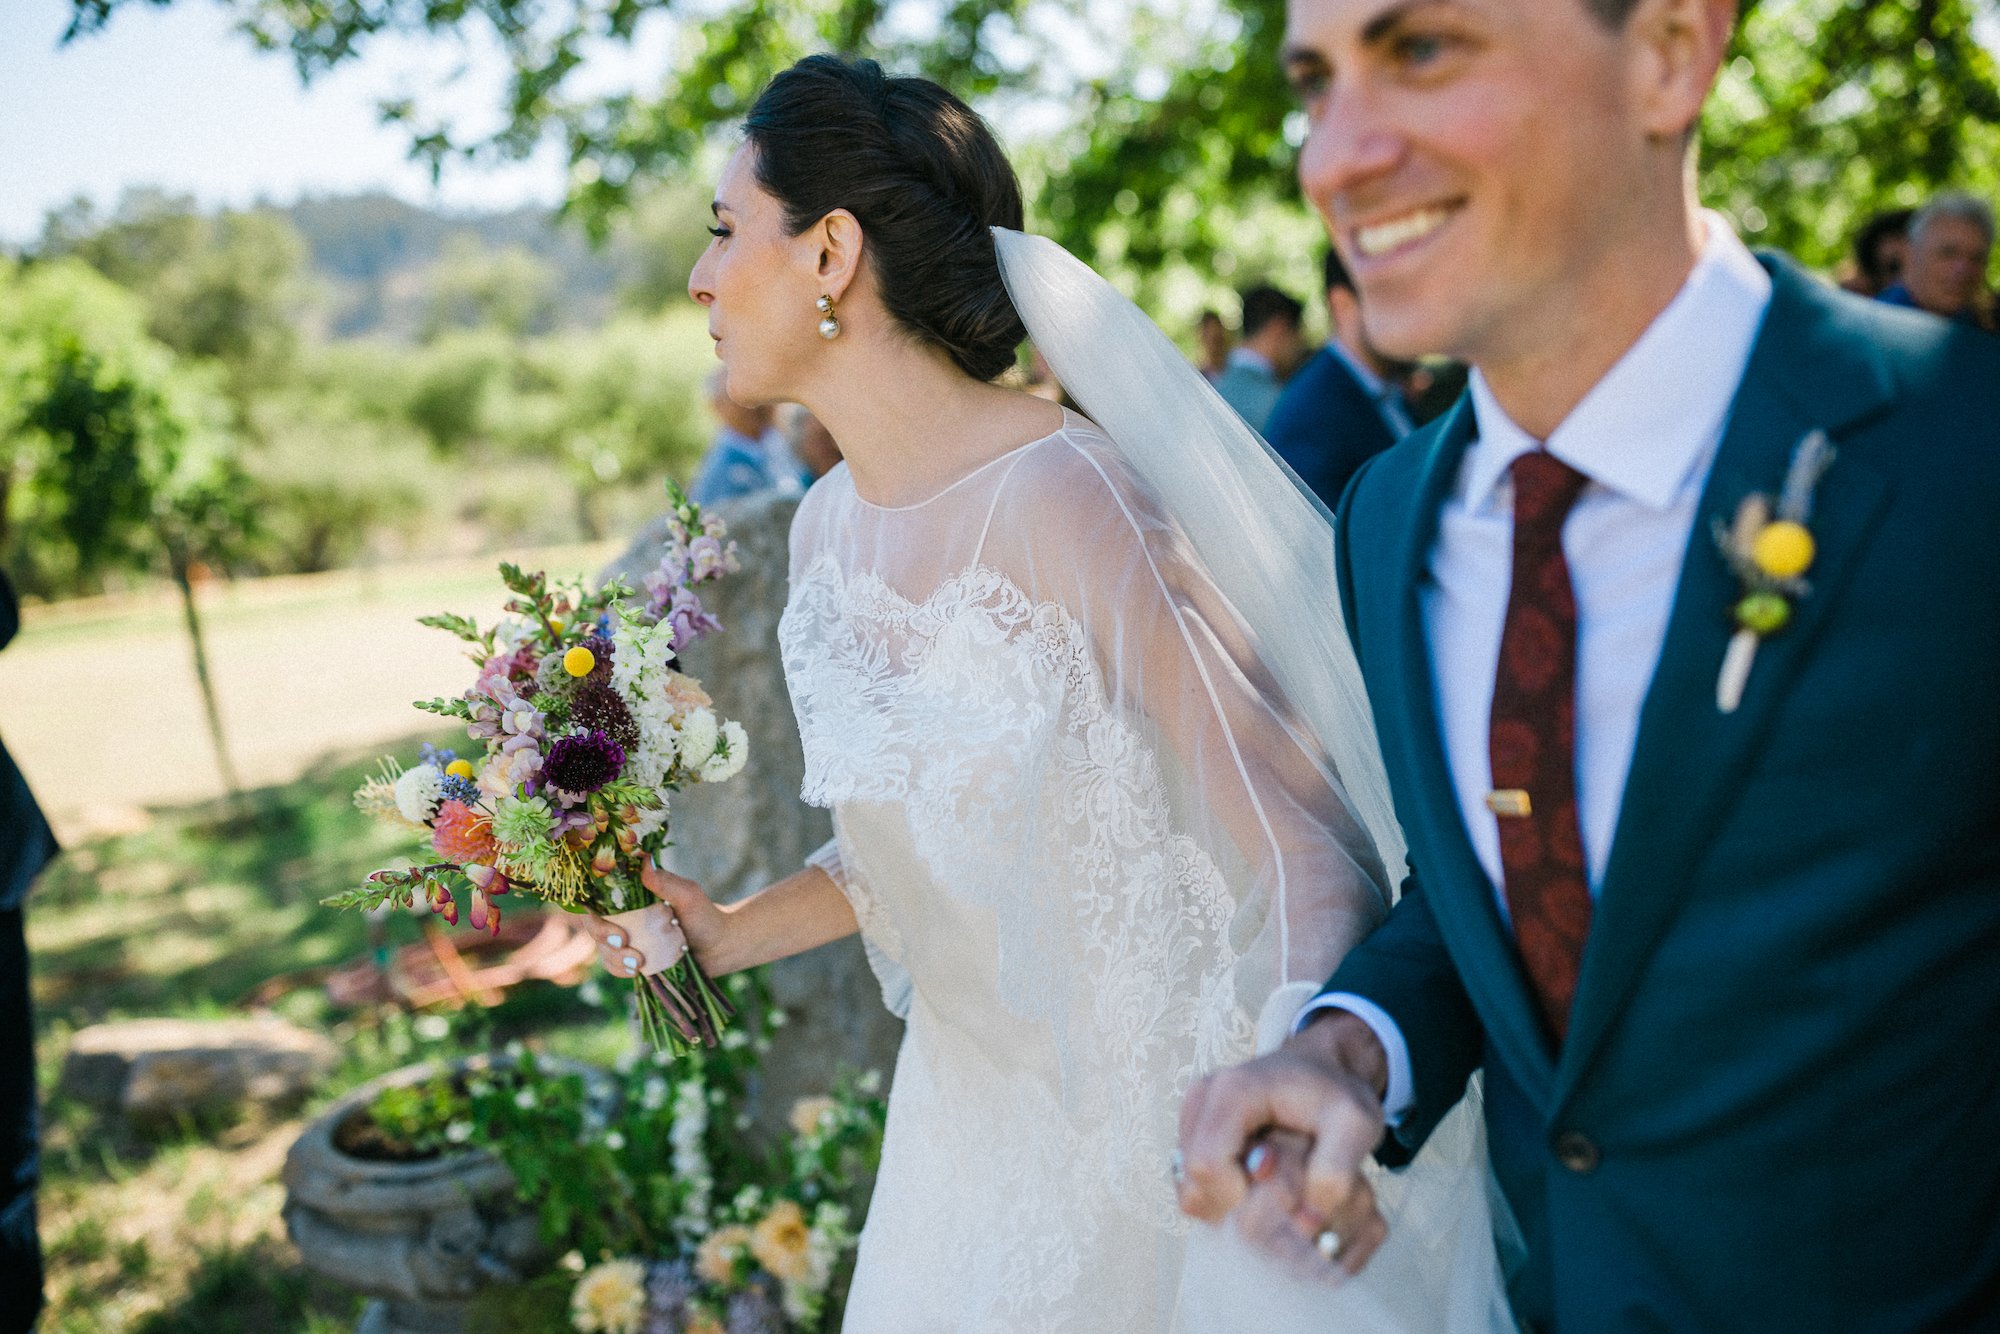 Beautiful bride Cate wore the Cliff tiered lace wedding dress by Halfpenny London